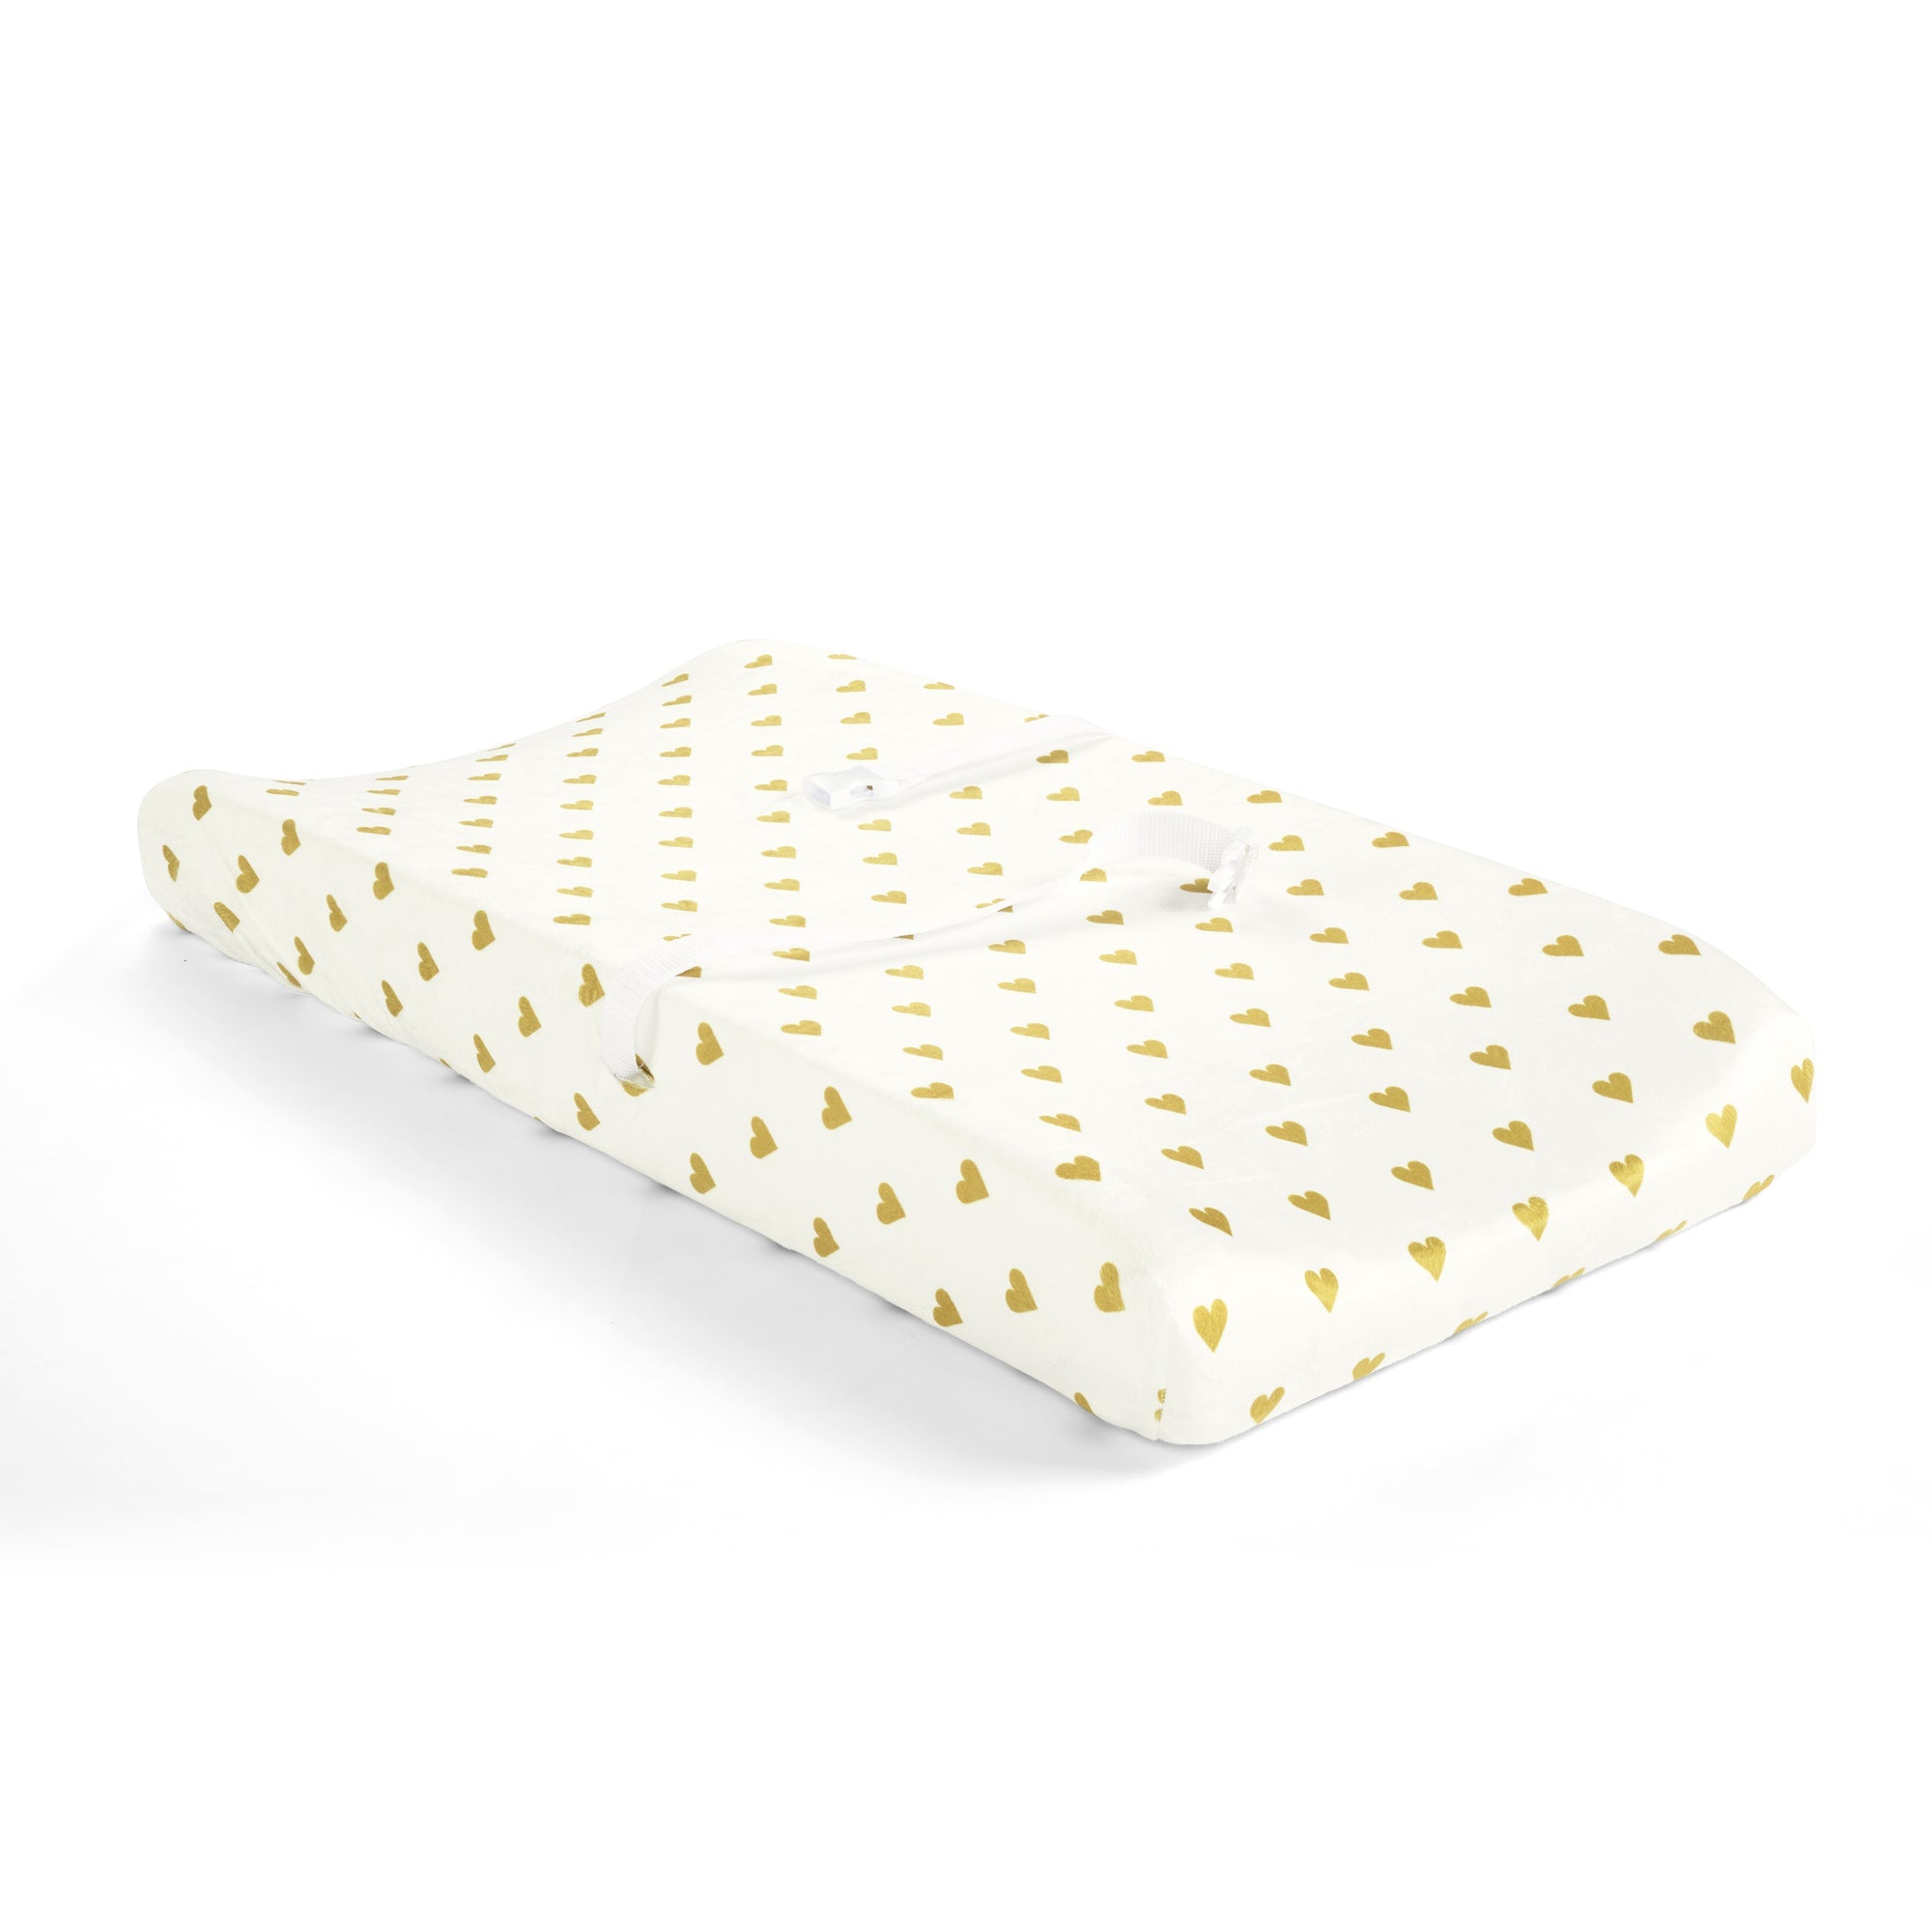 Boho Metallic Hearts All Over Soft & Plush Changing Pad Cover